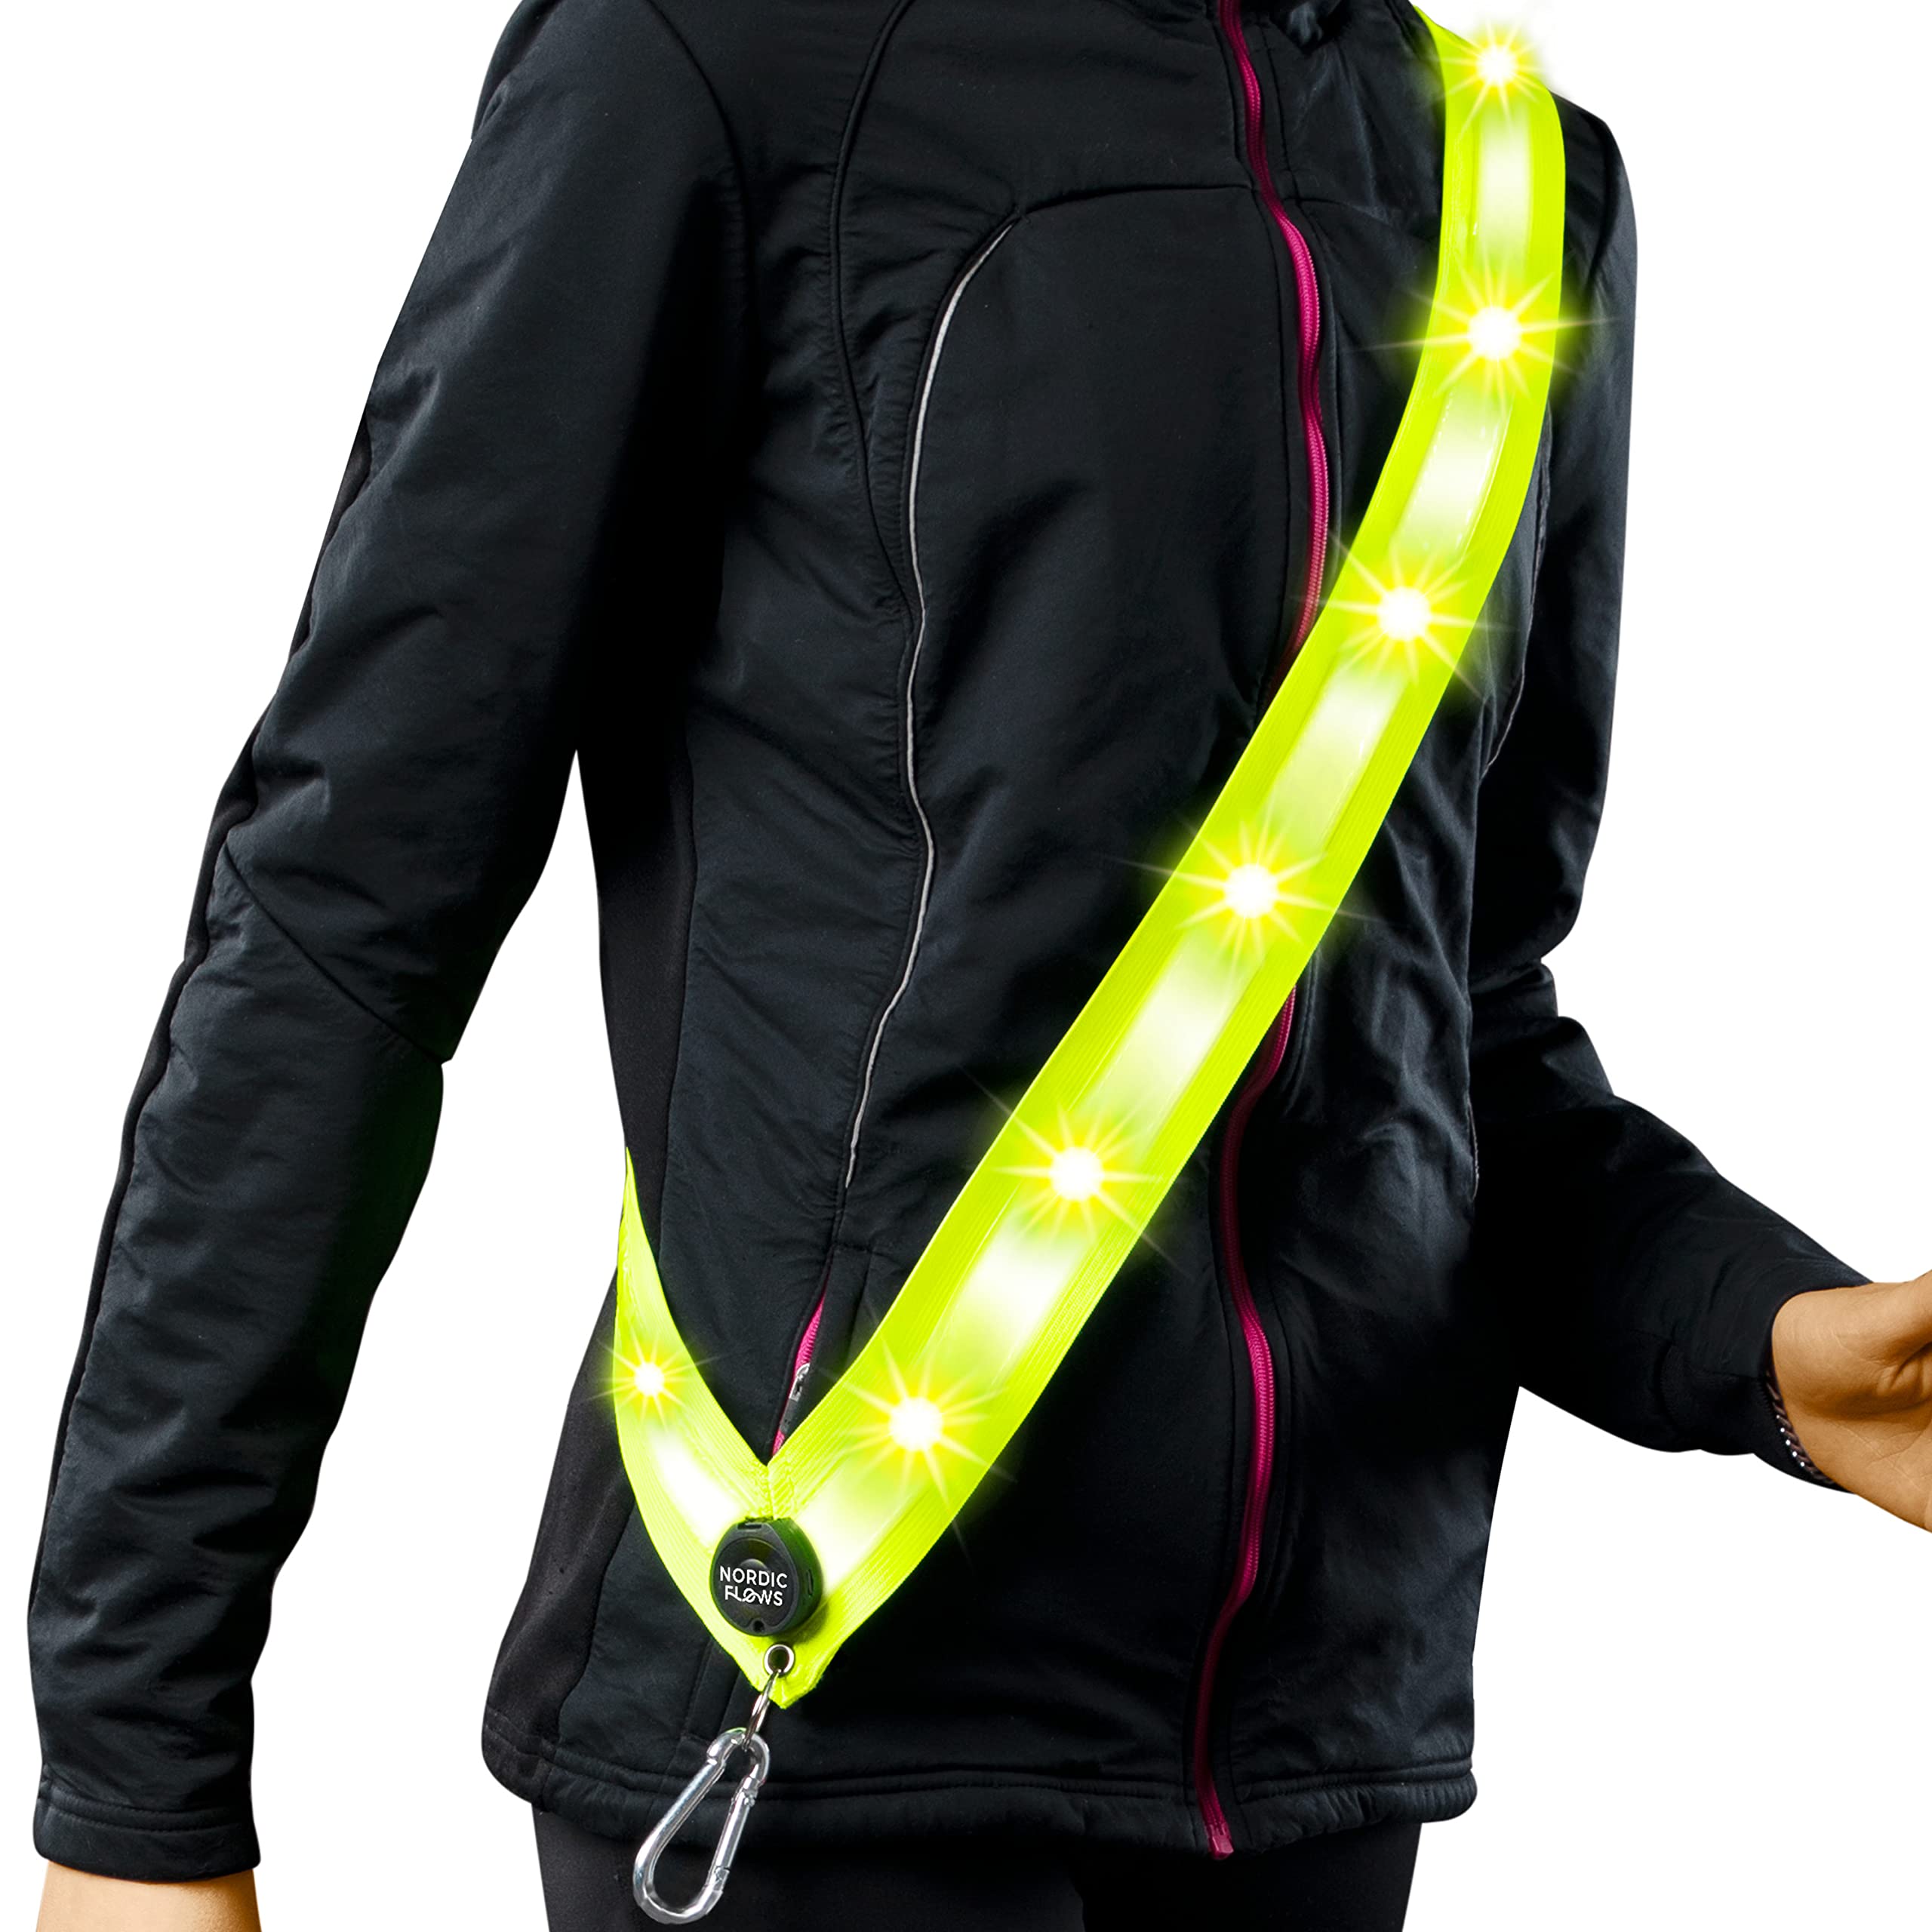 NordicFlows LED Reflective Sash, Rechargeable Led Reflective Lighted Vest  for Walking in The Dark, Night Dog